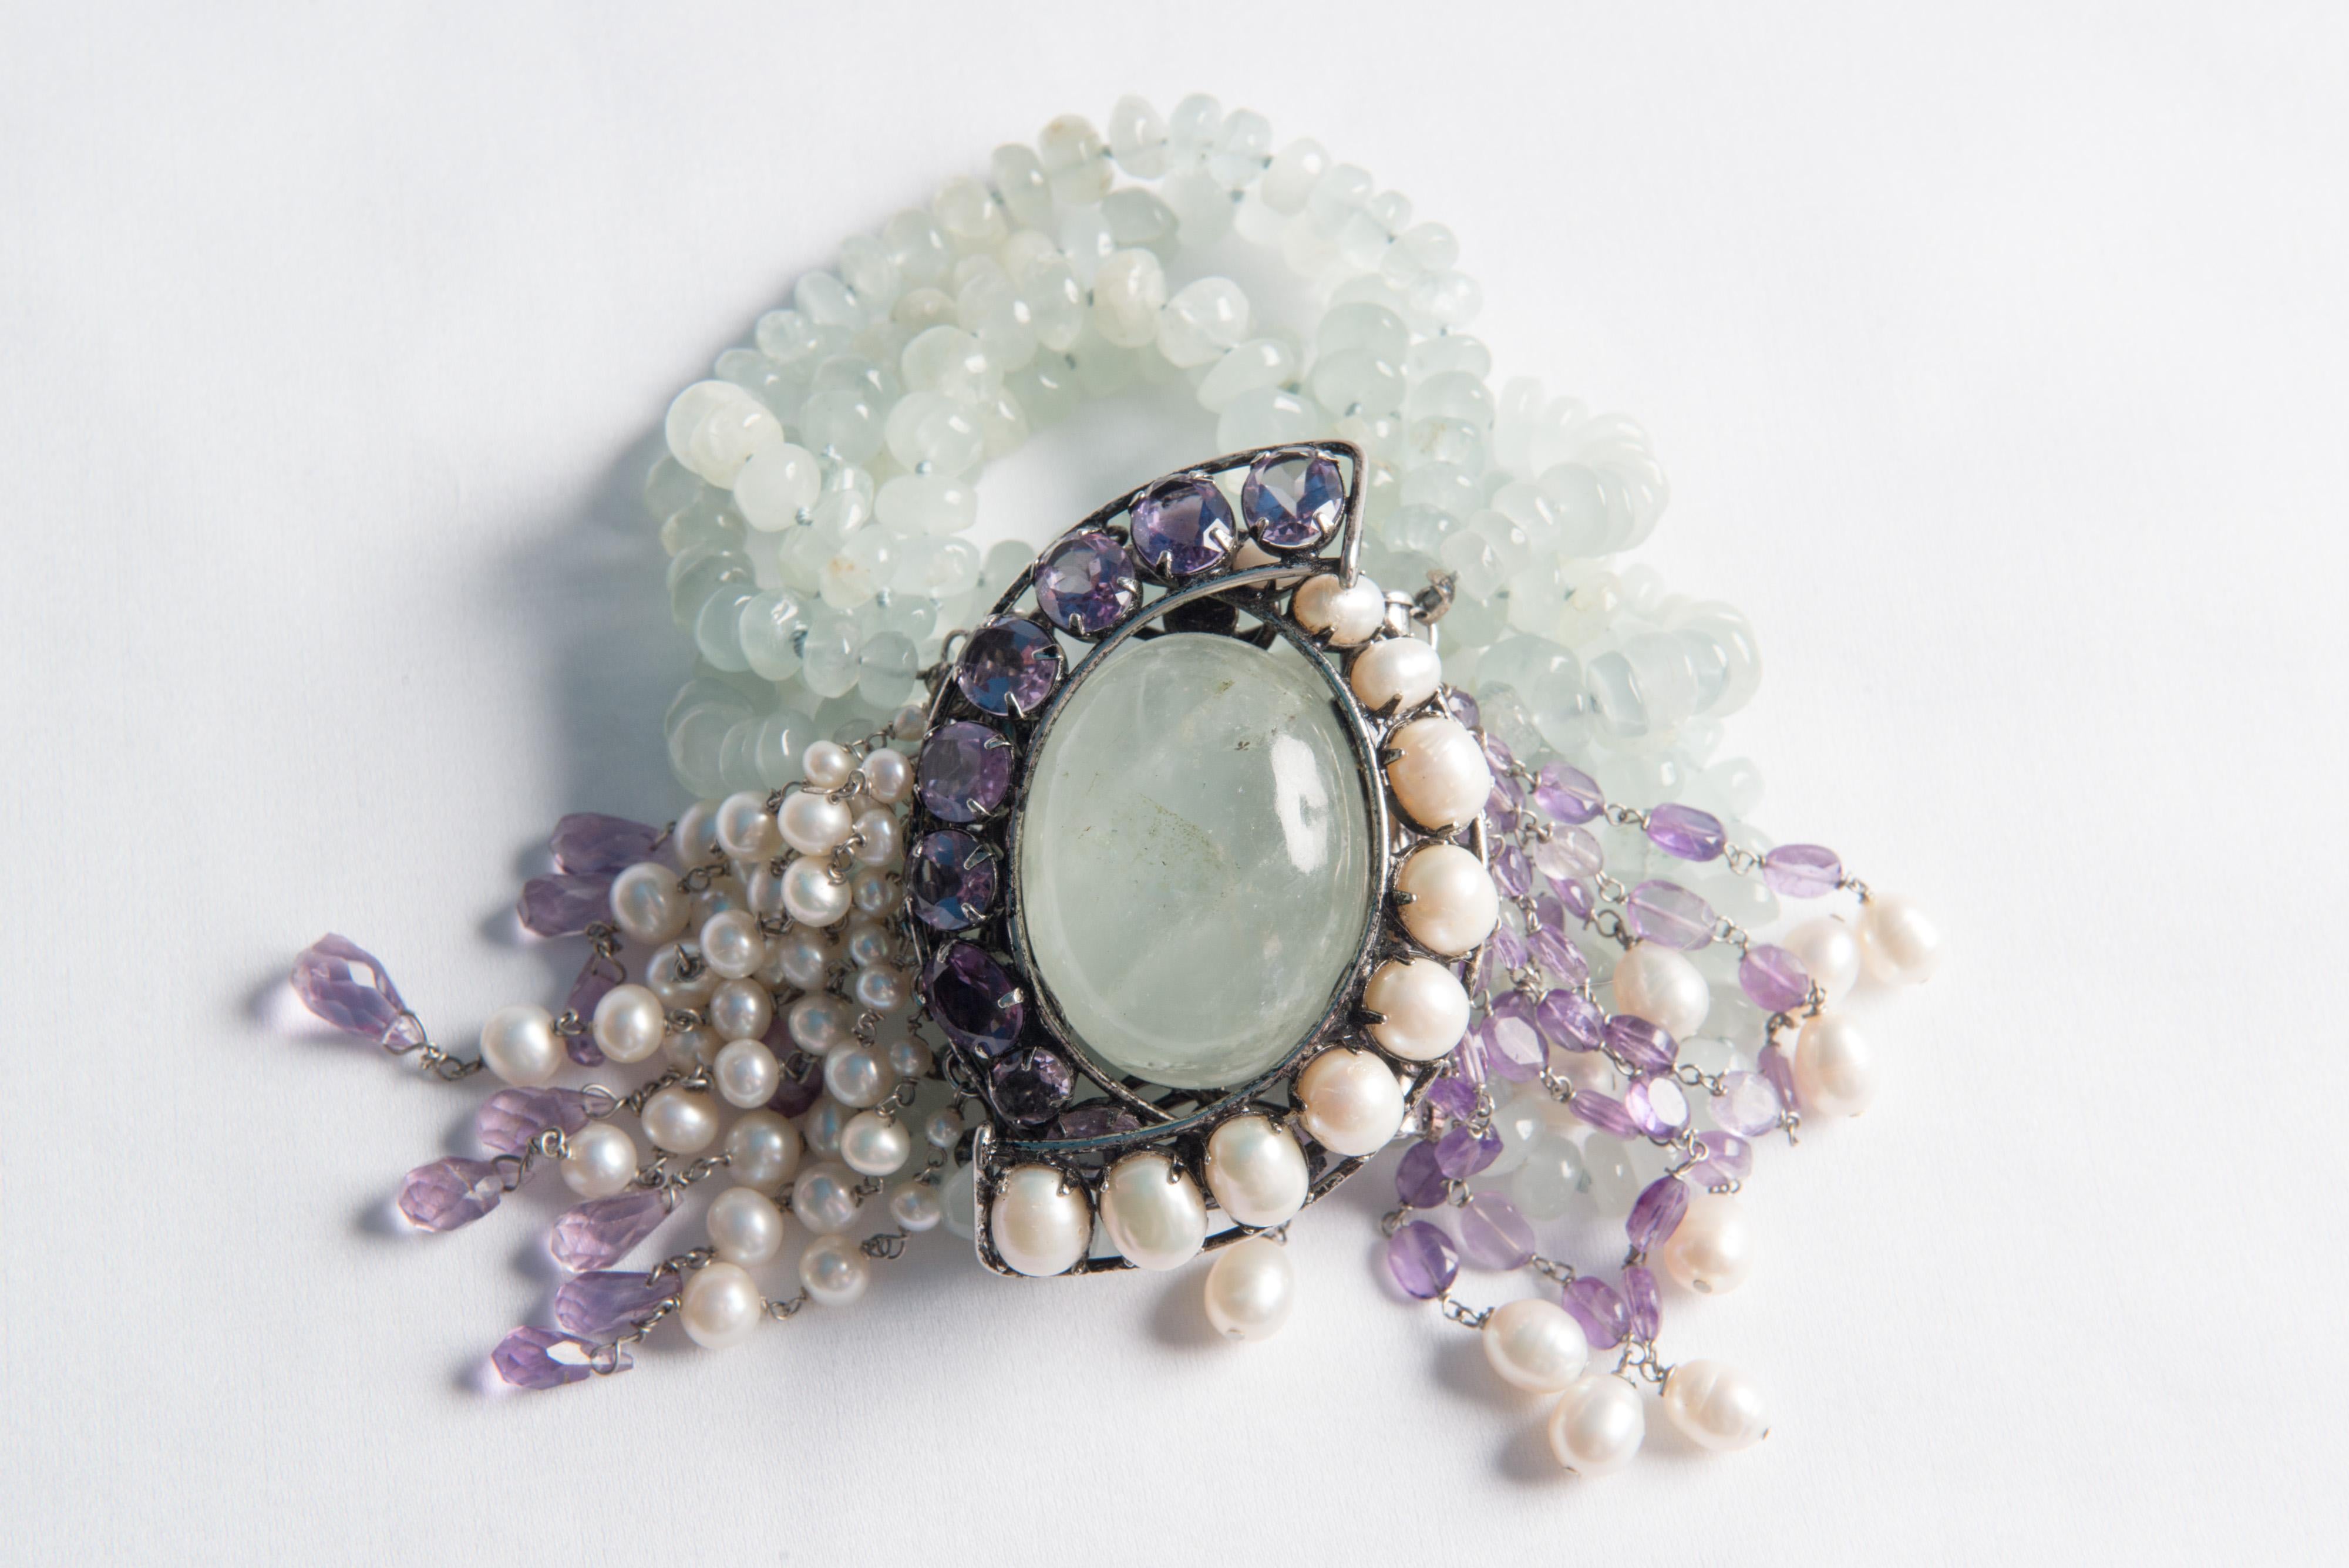 Large Iradj Moini eight strand pale green beaded bracelet with huge oval pale green cabochon gemstone surrounded by amethyst gems and pearls and multiple strands of dangling pearl and amethyst stones.
Removable brooch.